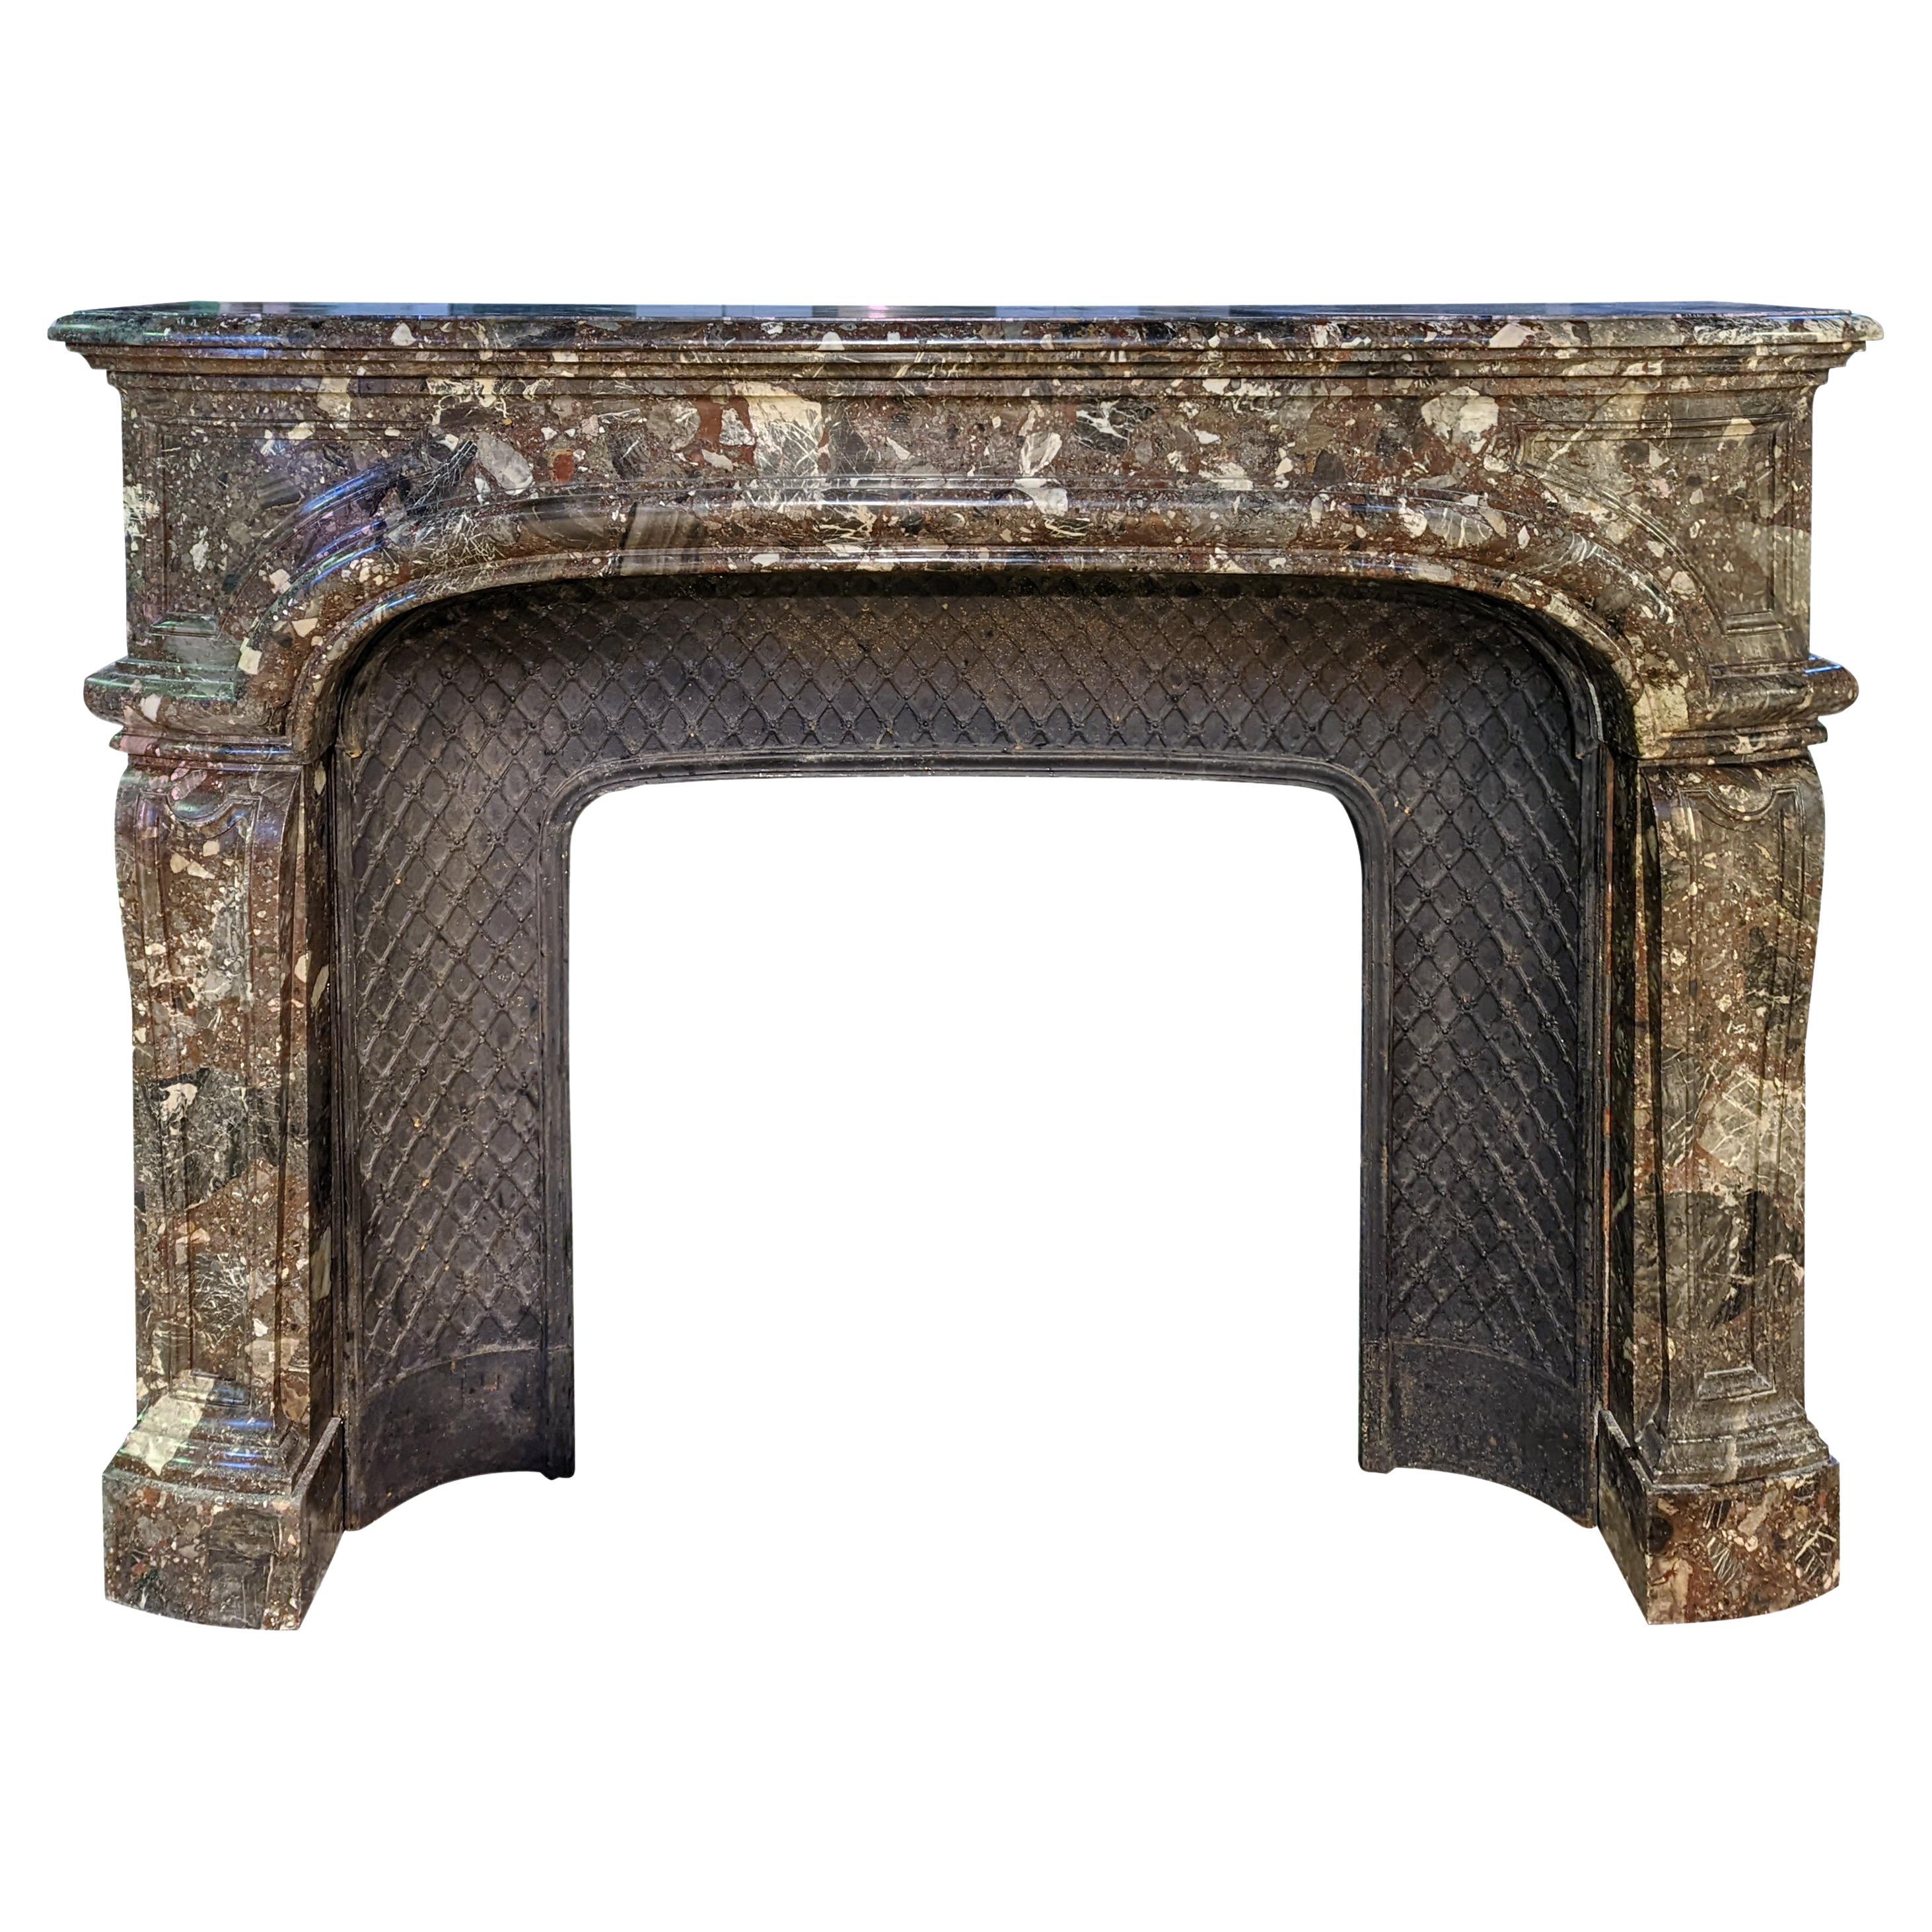 Regence Style Fireplace in Breccia Nouvelle Marble